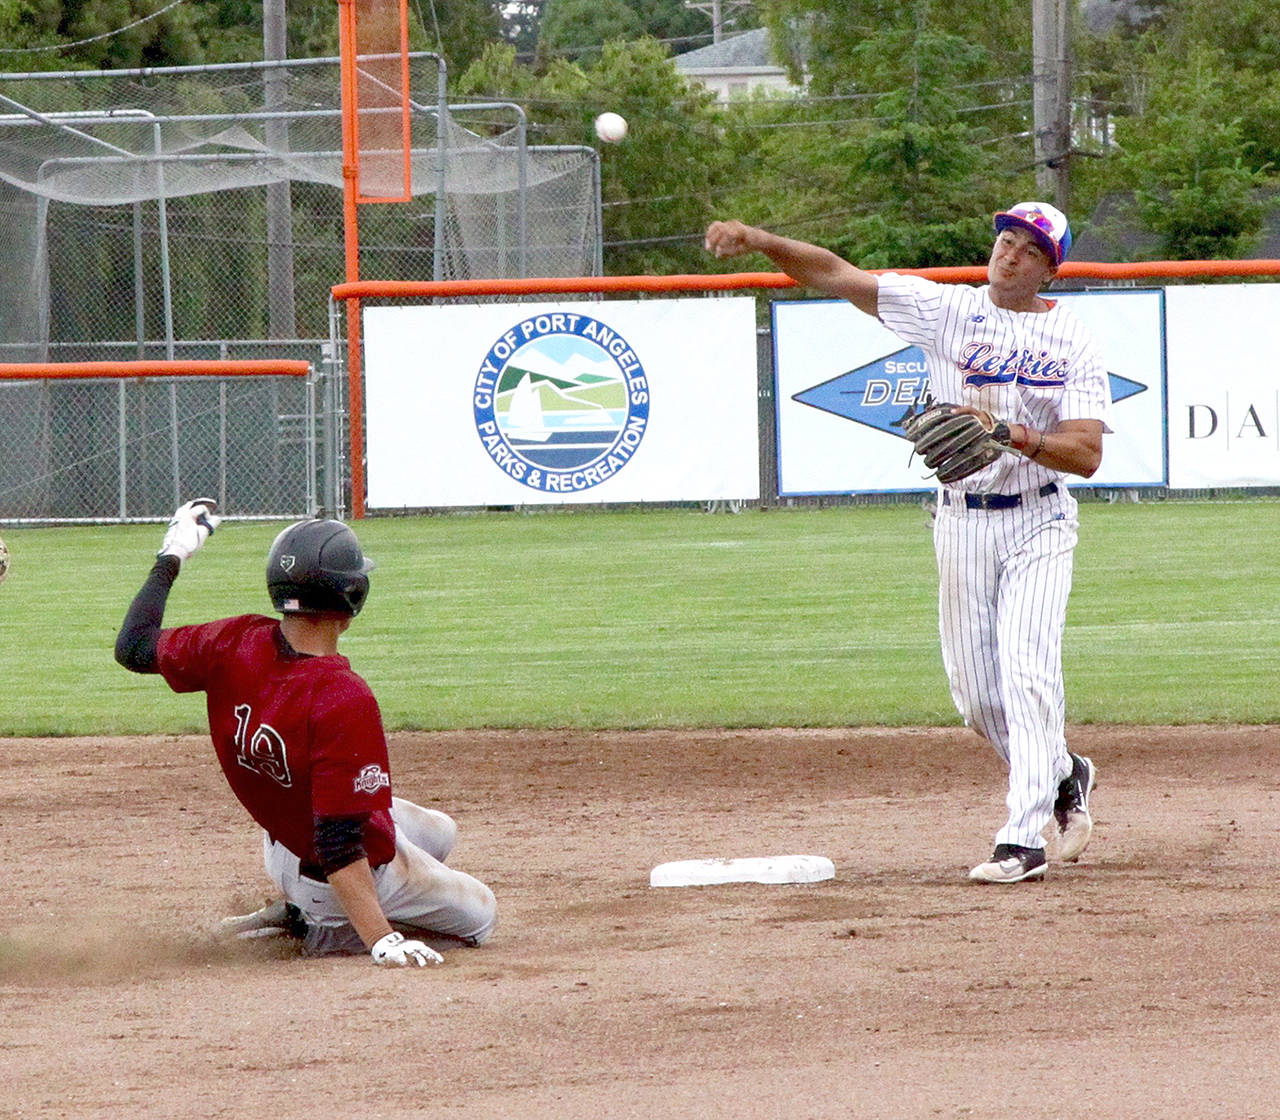 Dave Logan/for Peninsula Daily News Port Angeles’ Jason Dicochea makes a throw to first base to complete a double play after forcing Corvallis’ Cameron Haskell at second Wednesday at Civic Field.